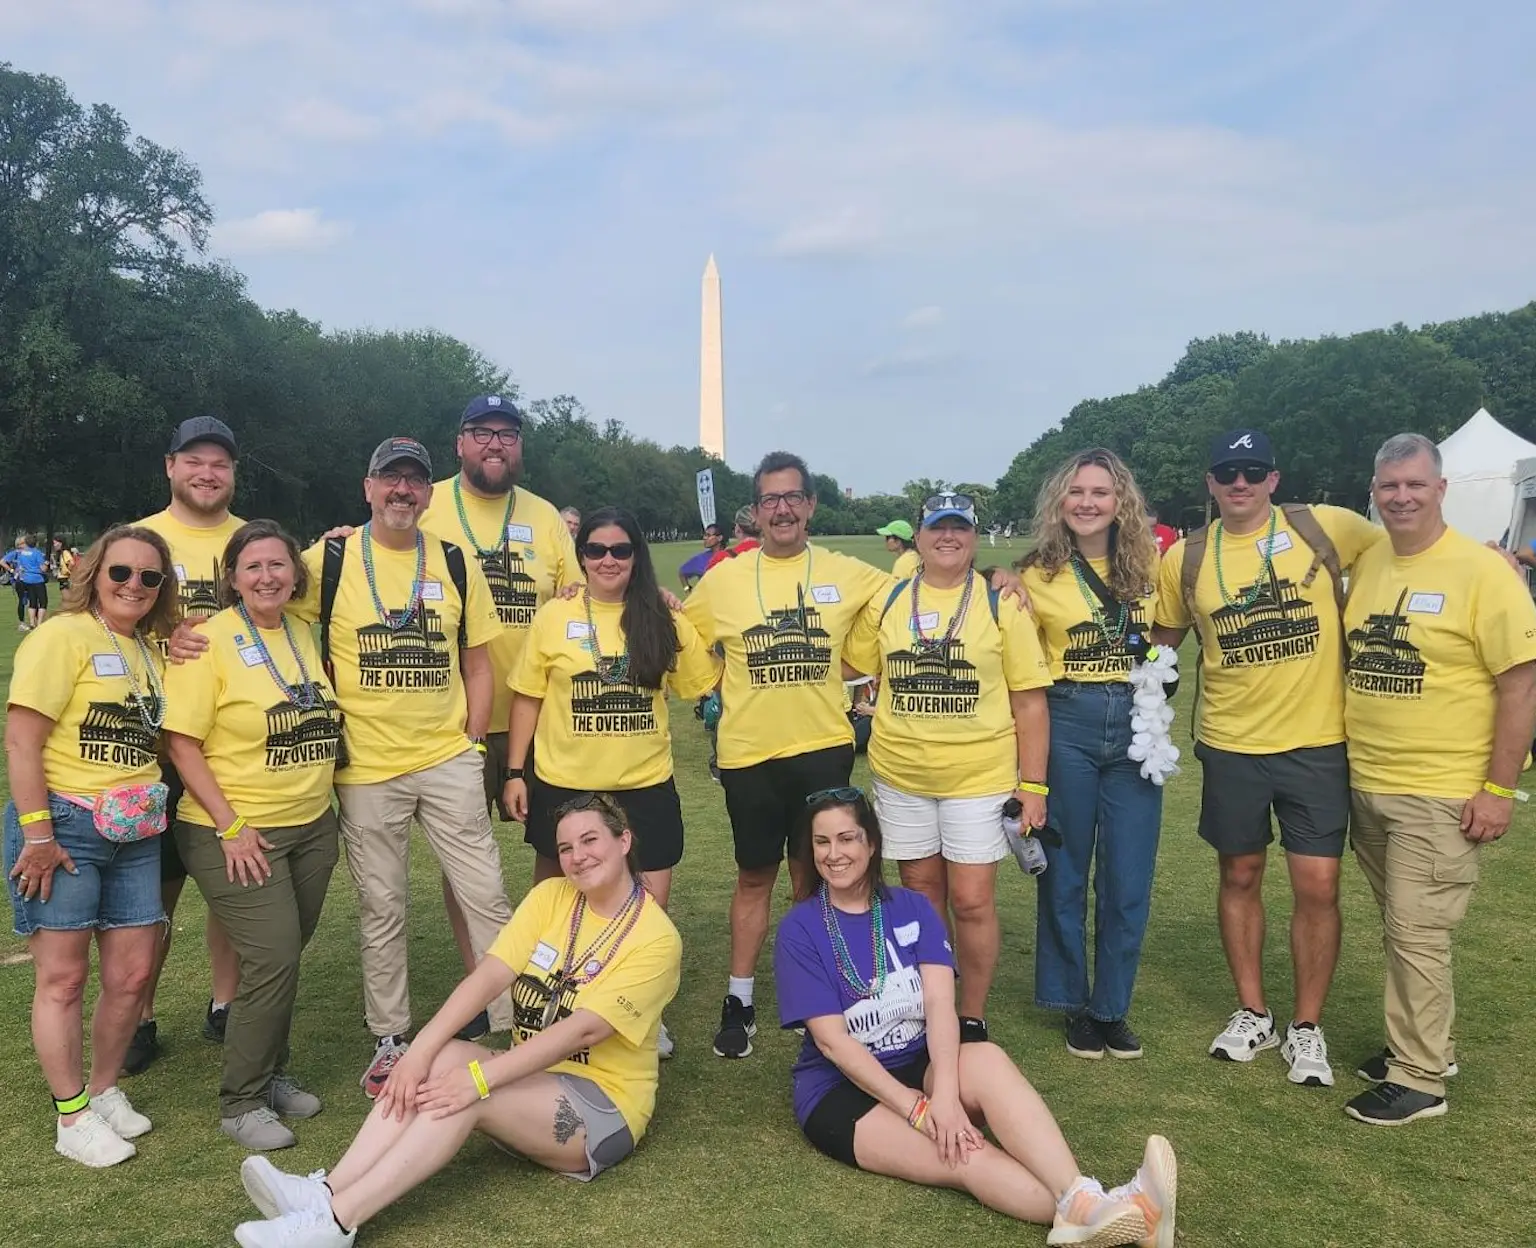 Chapter members in a group photo in front of the Washington Monument in D.C.